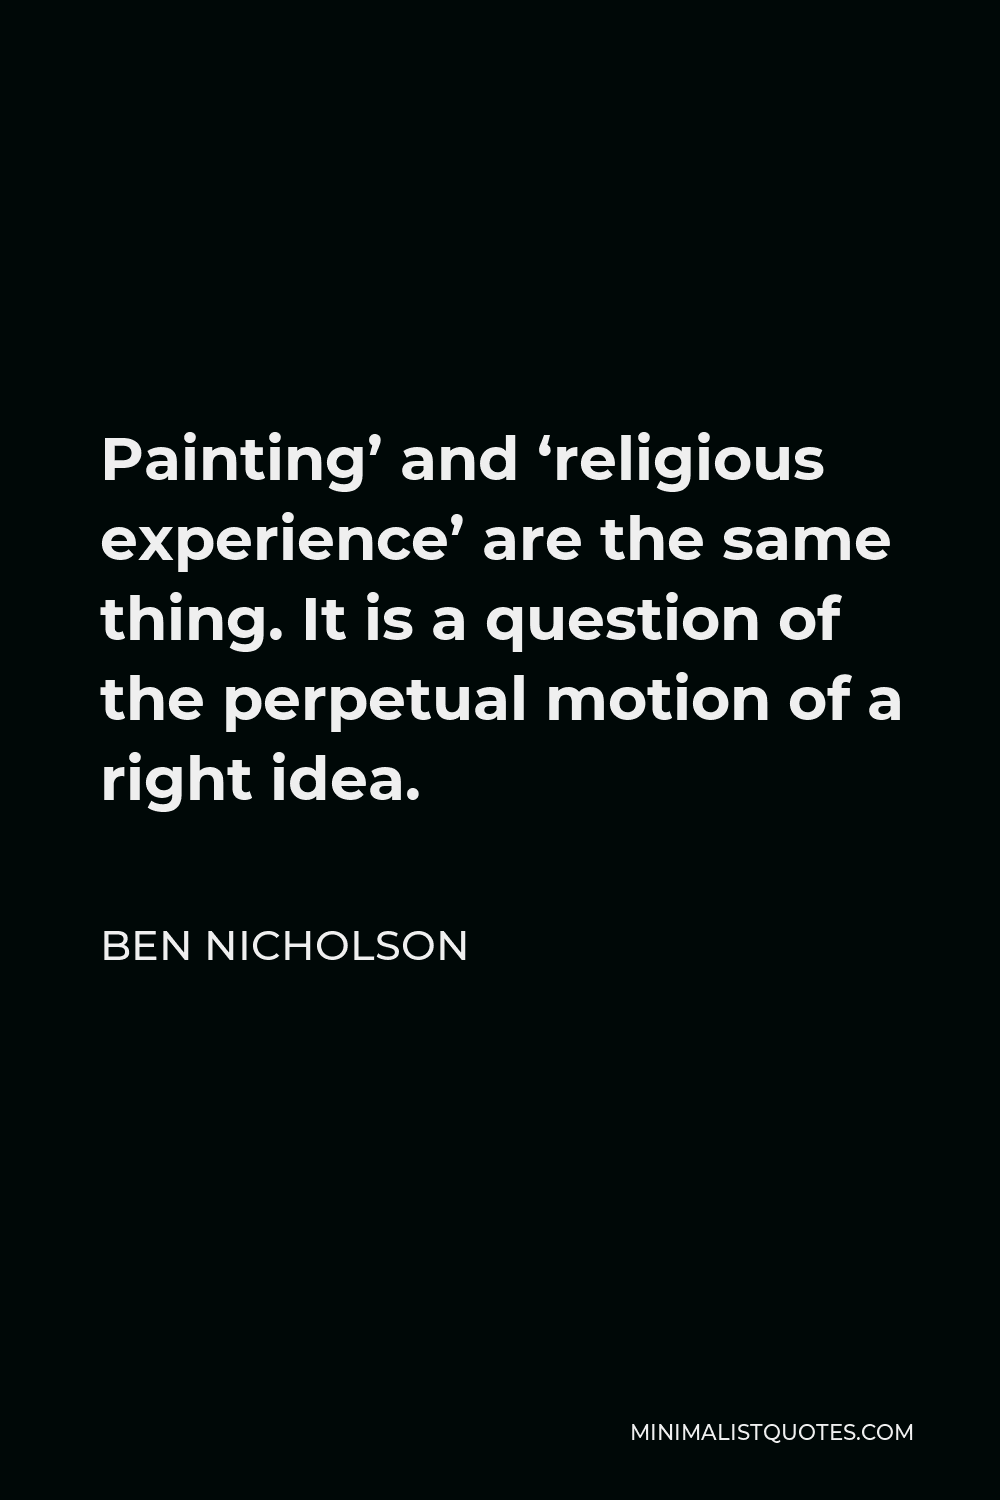 Ben Nicholson Quote - Painting’ and ‘religious experience’ are the same thing. It is a question of the perpetual motion of a right idea.